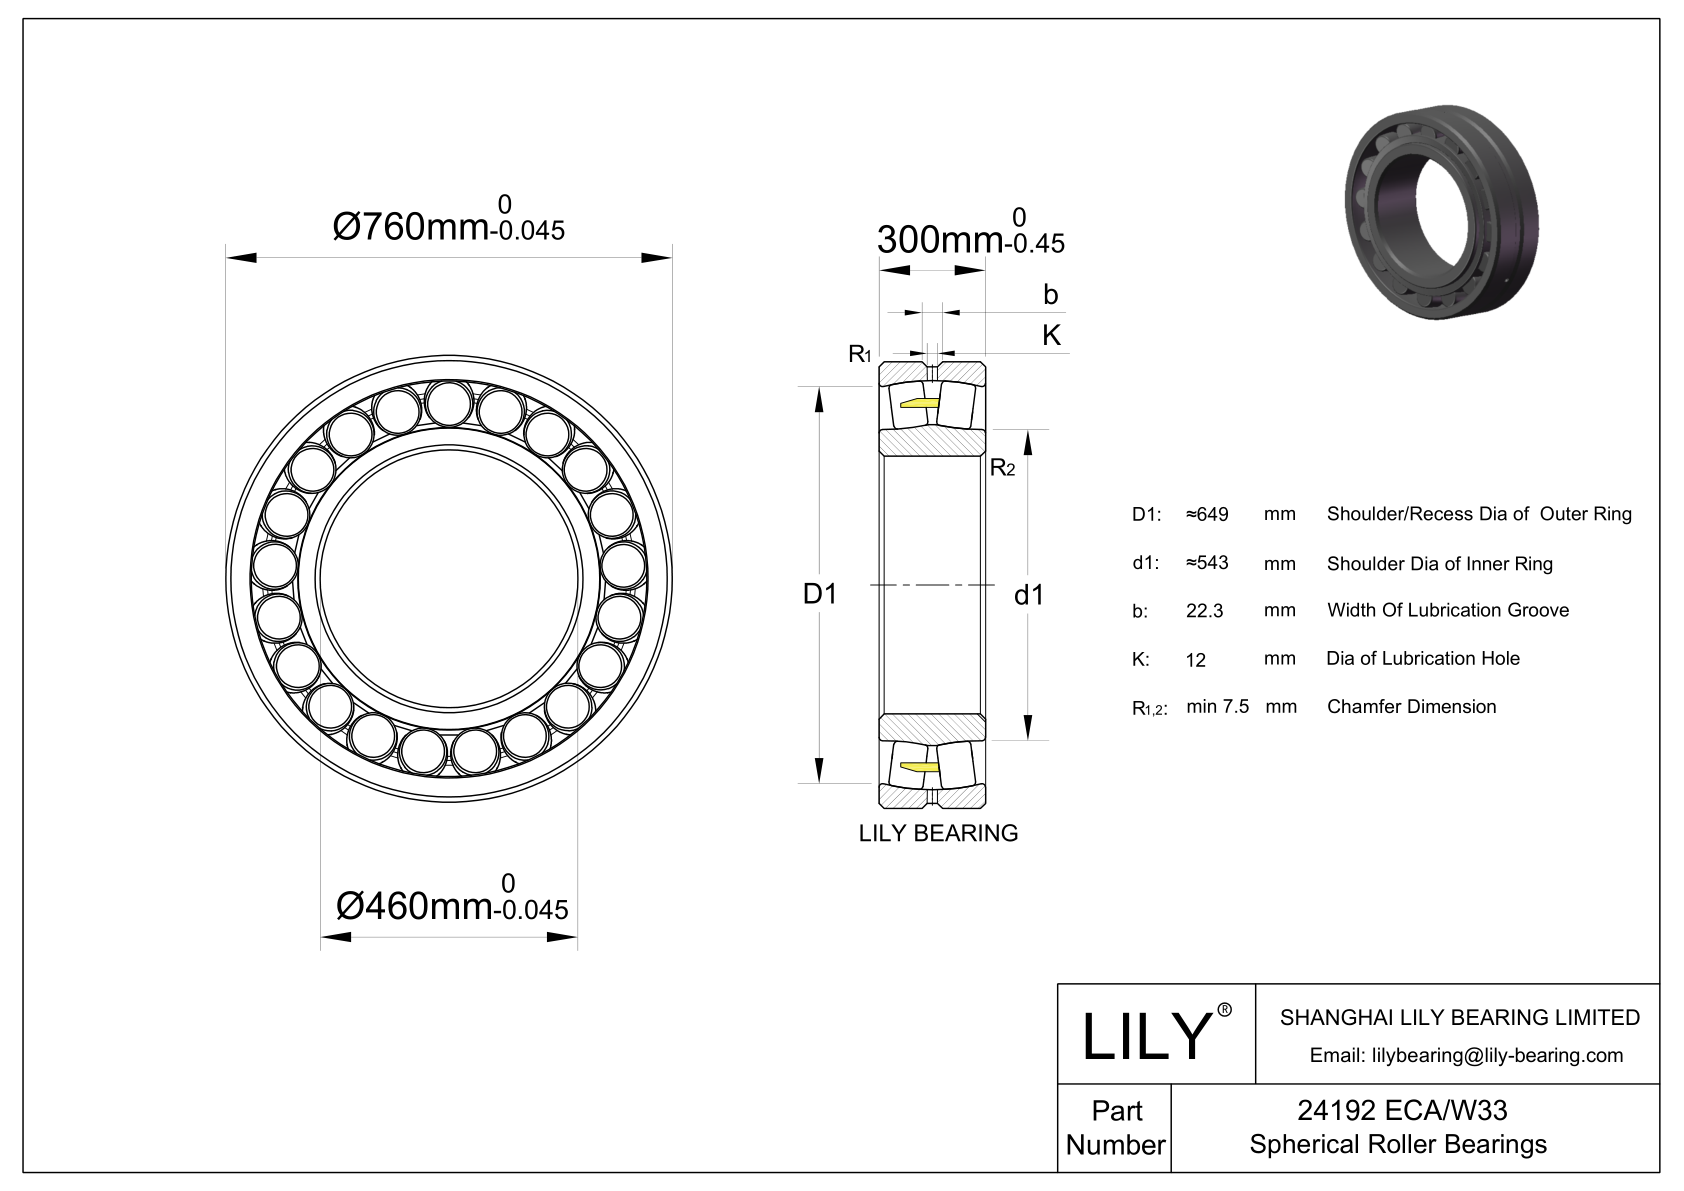 24192 ECA/W33 Double Row Spherical Roller Bearing cad drawing